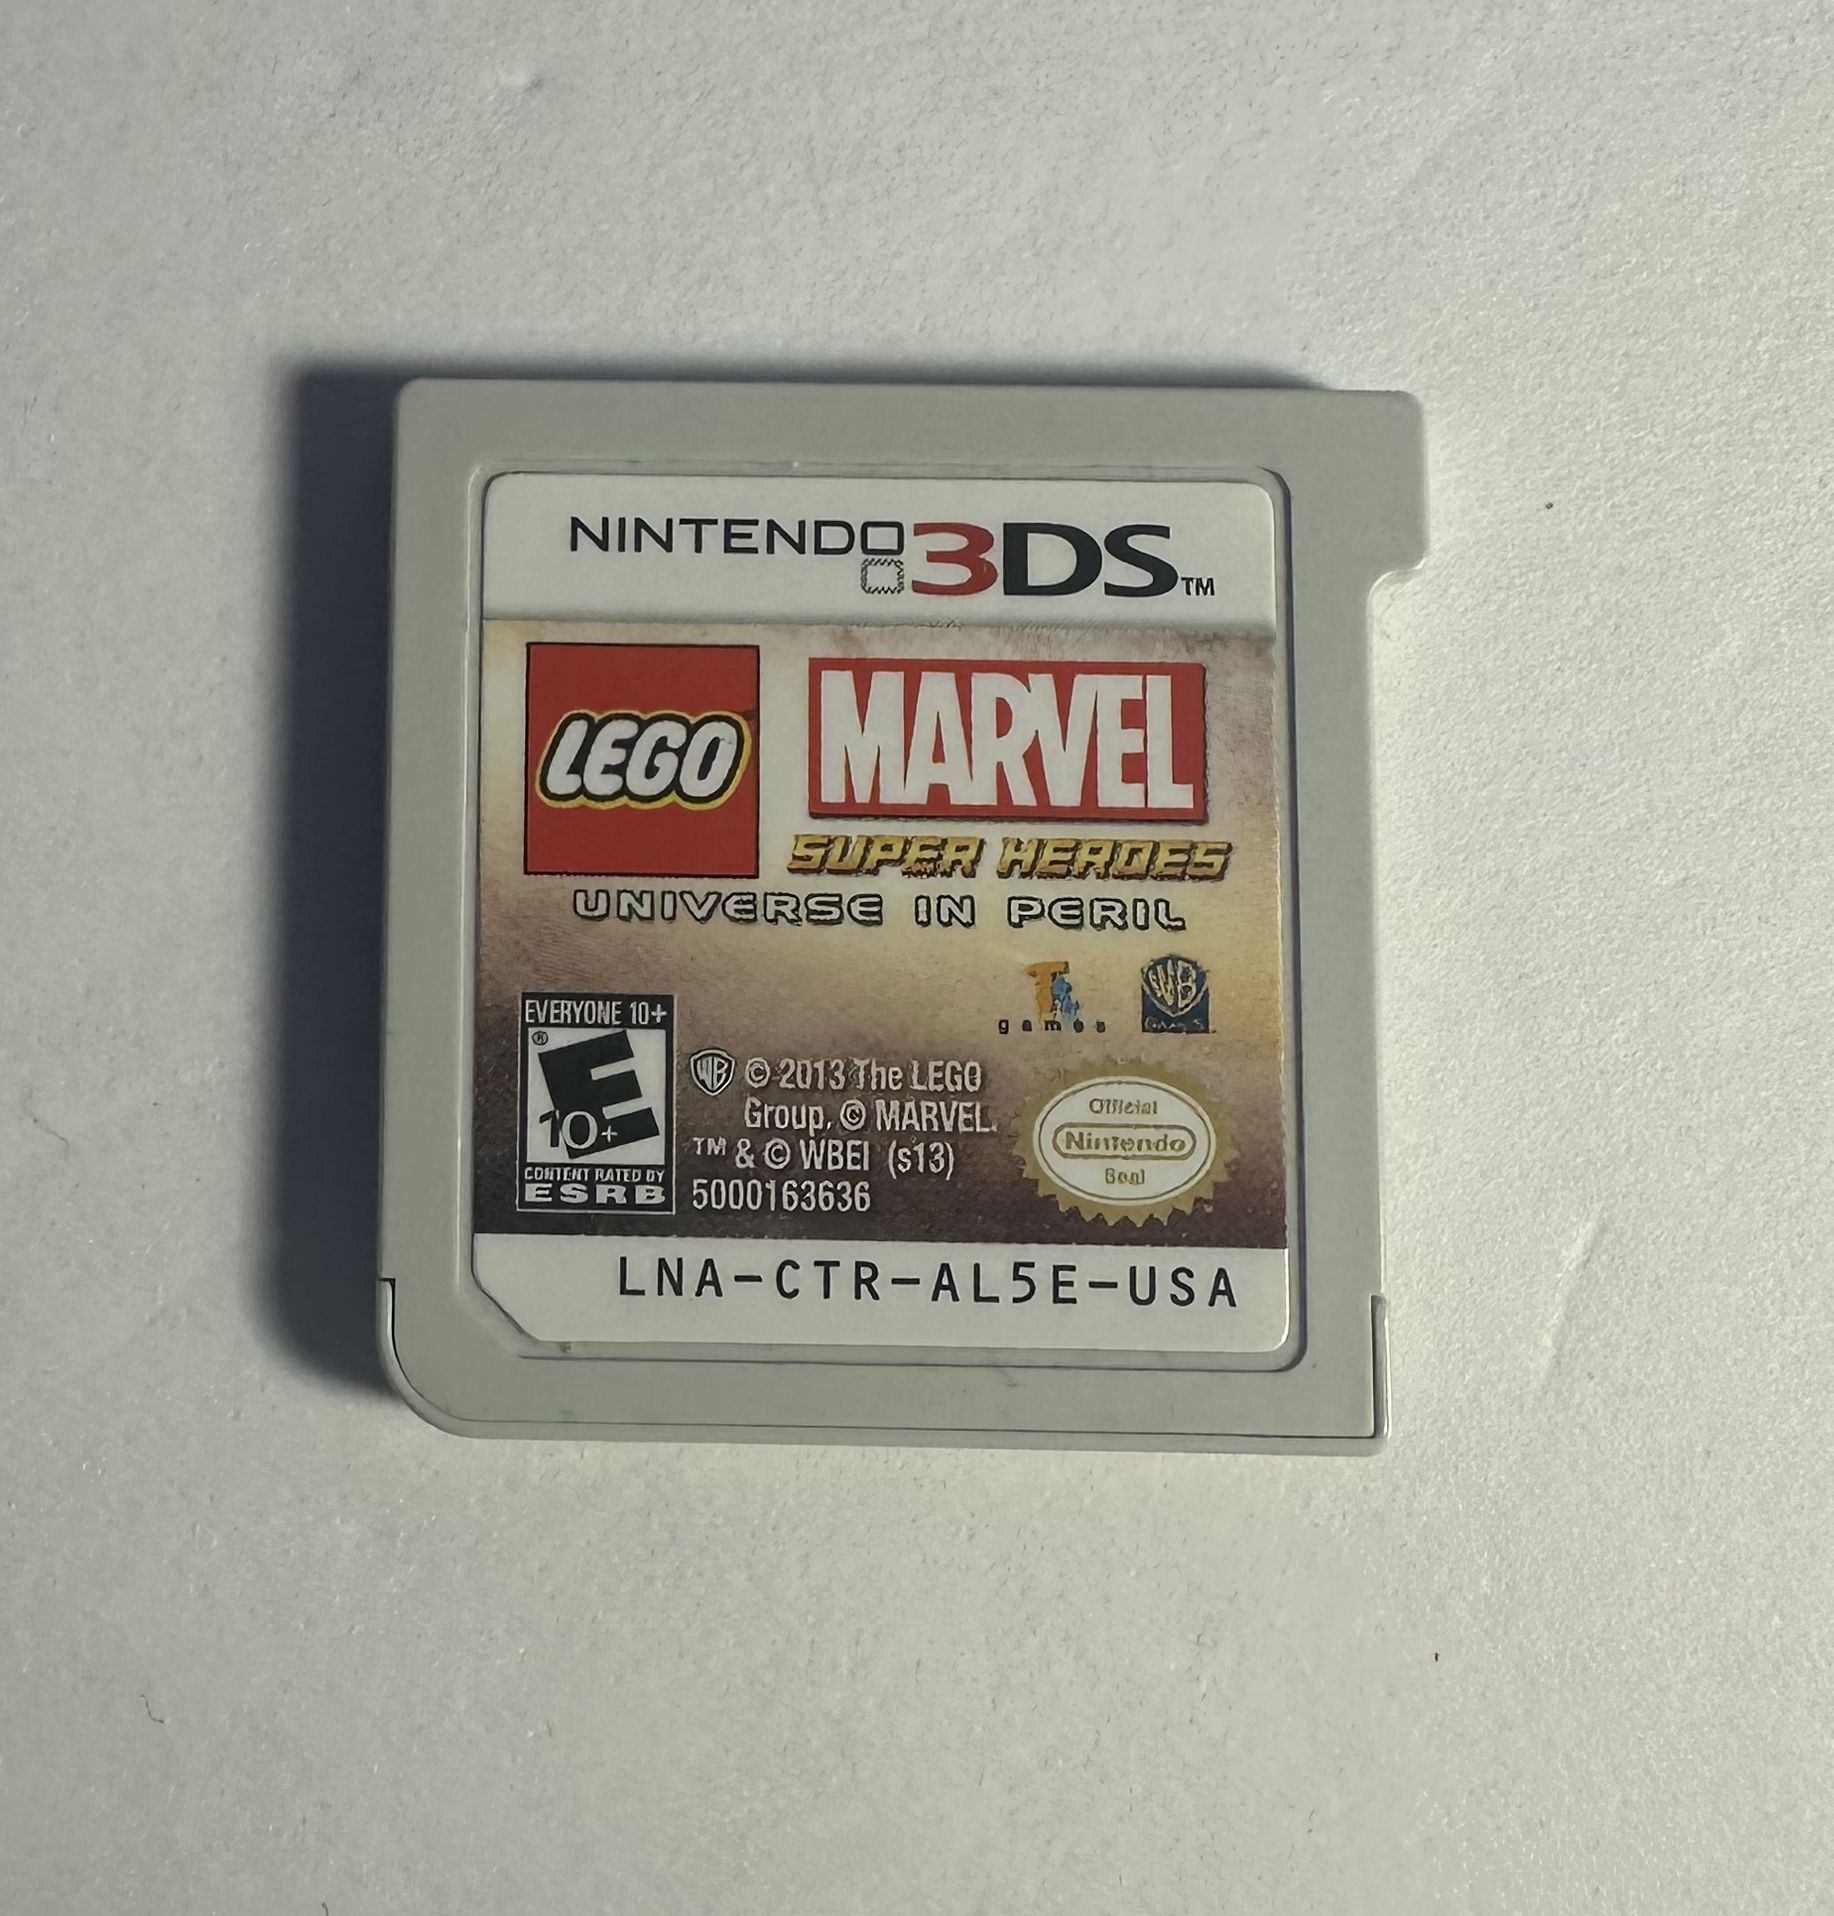 LEGO Marvel Super Heroes - Universe in Peril (Nintendo 3DS, 2013) Game Only **TESTED 